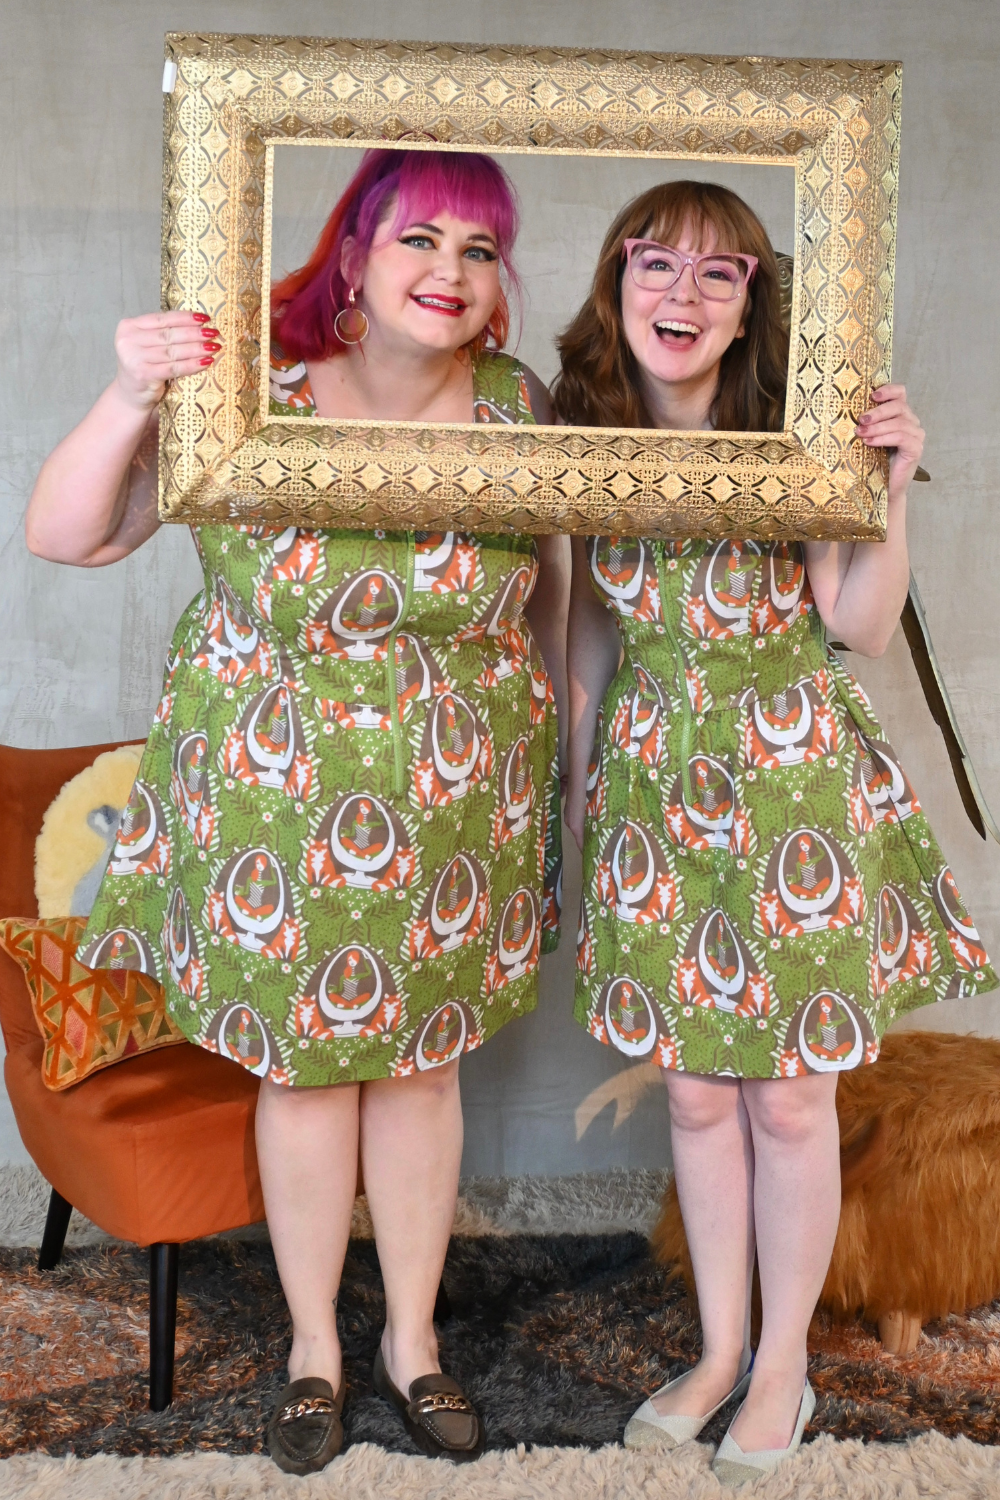 Two smiling models wearing matching green printed dresses, posing with gold picture frame